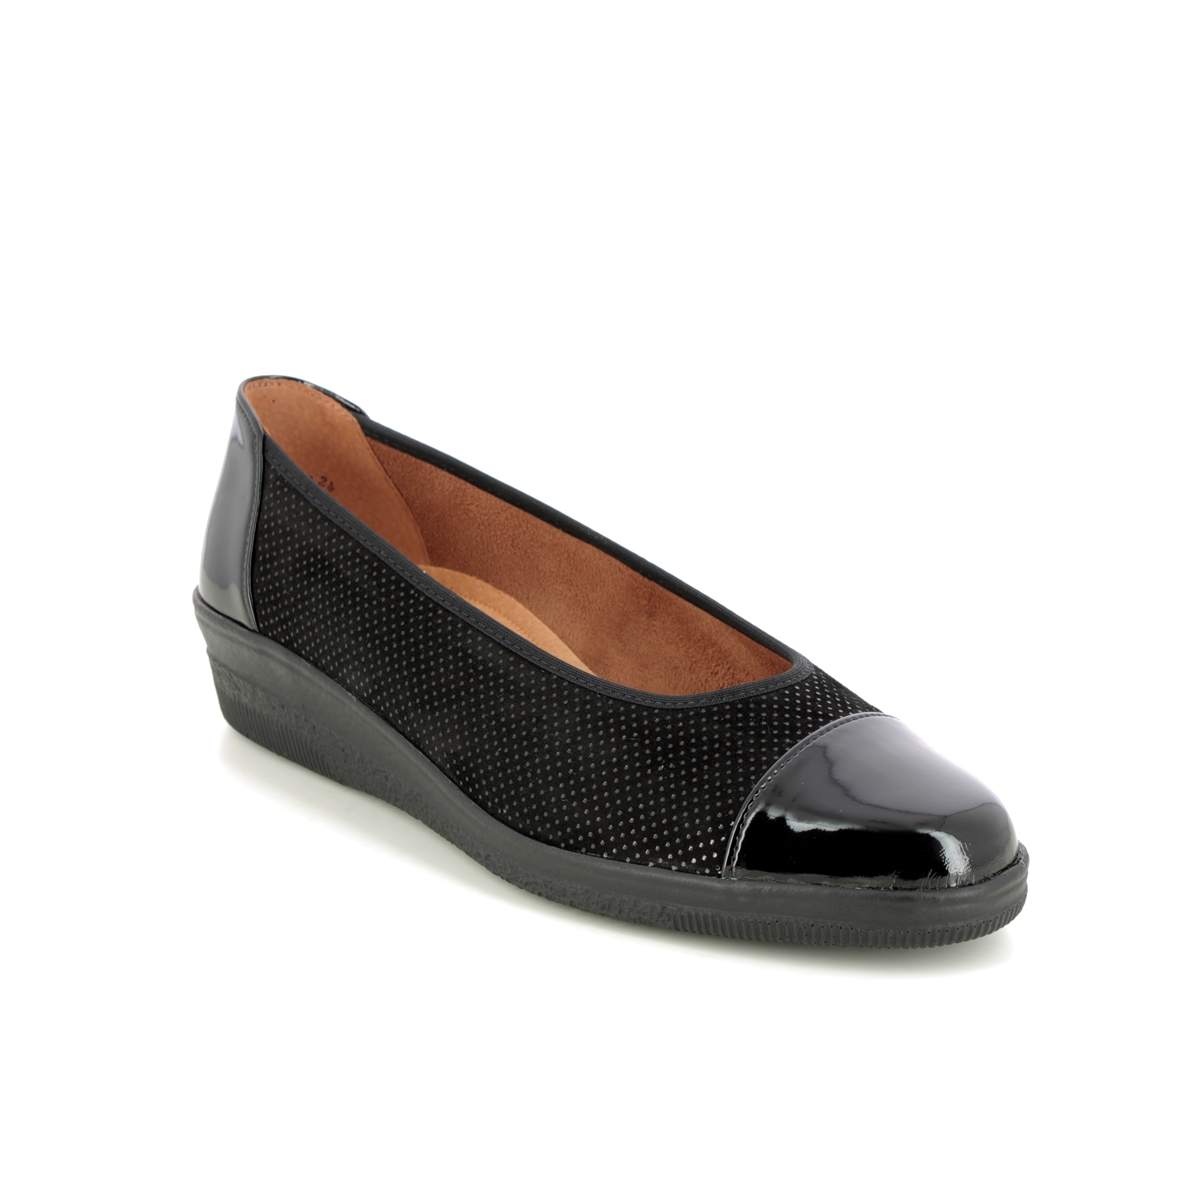 Gabor Petunia Black patent Womens Comfort Slip On Shoes 06.402.87 in a Plain Leather and Man-made in Size 6.5